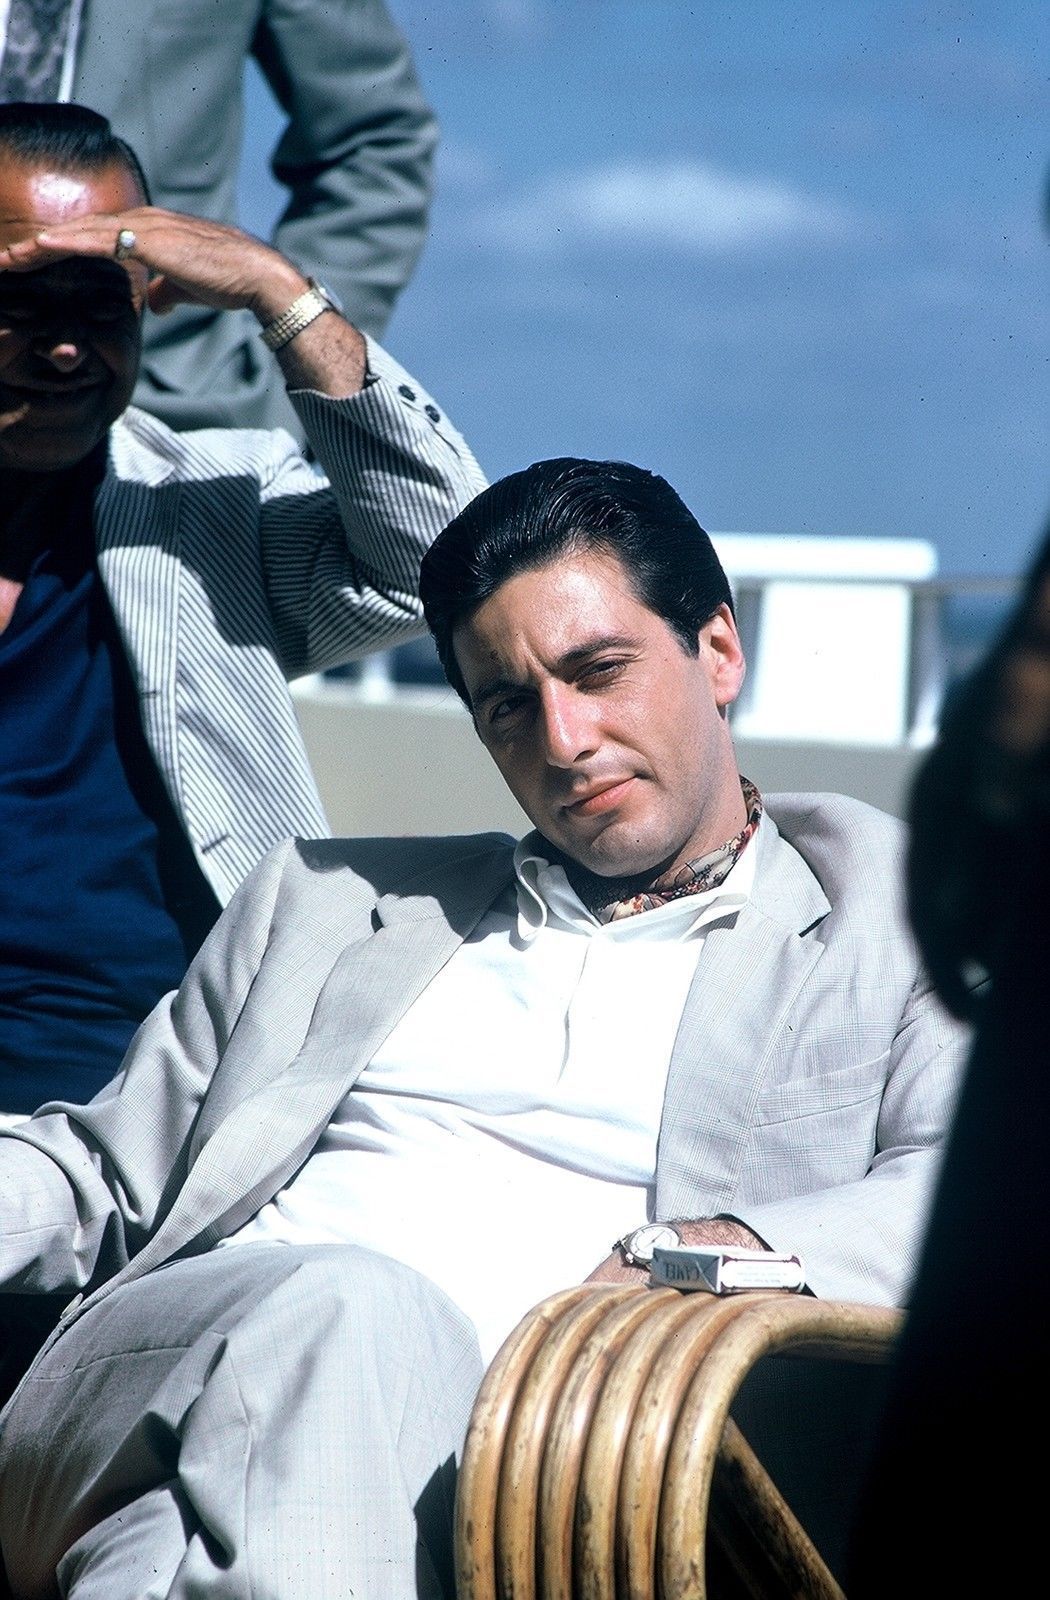 The Godfather Hintergrundbild 1050x1600. MUBI India Pacino, behind the scenes of THE GODFATHER: PART II. The iconic actor was born on this day in 1940